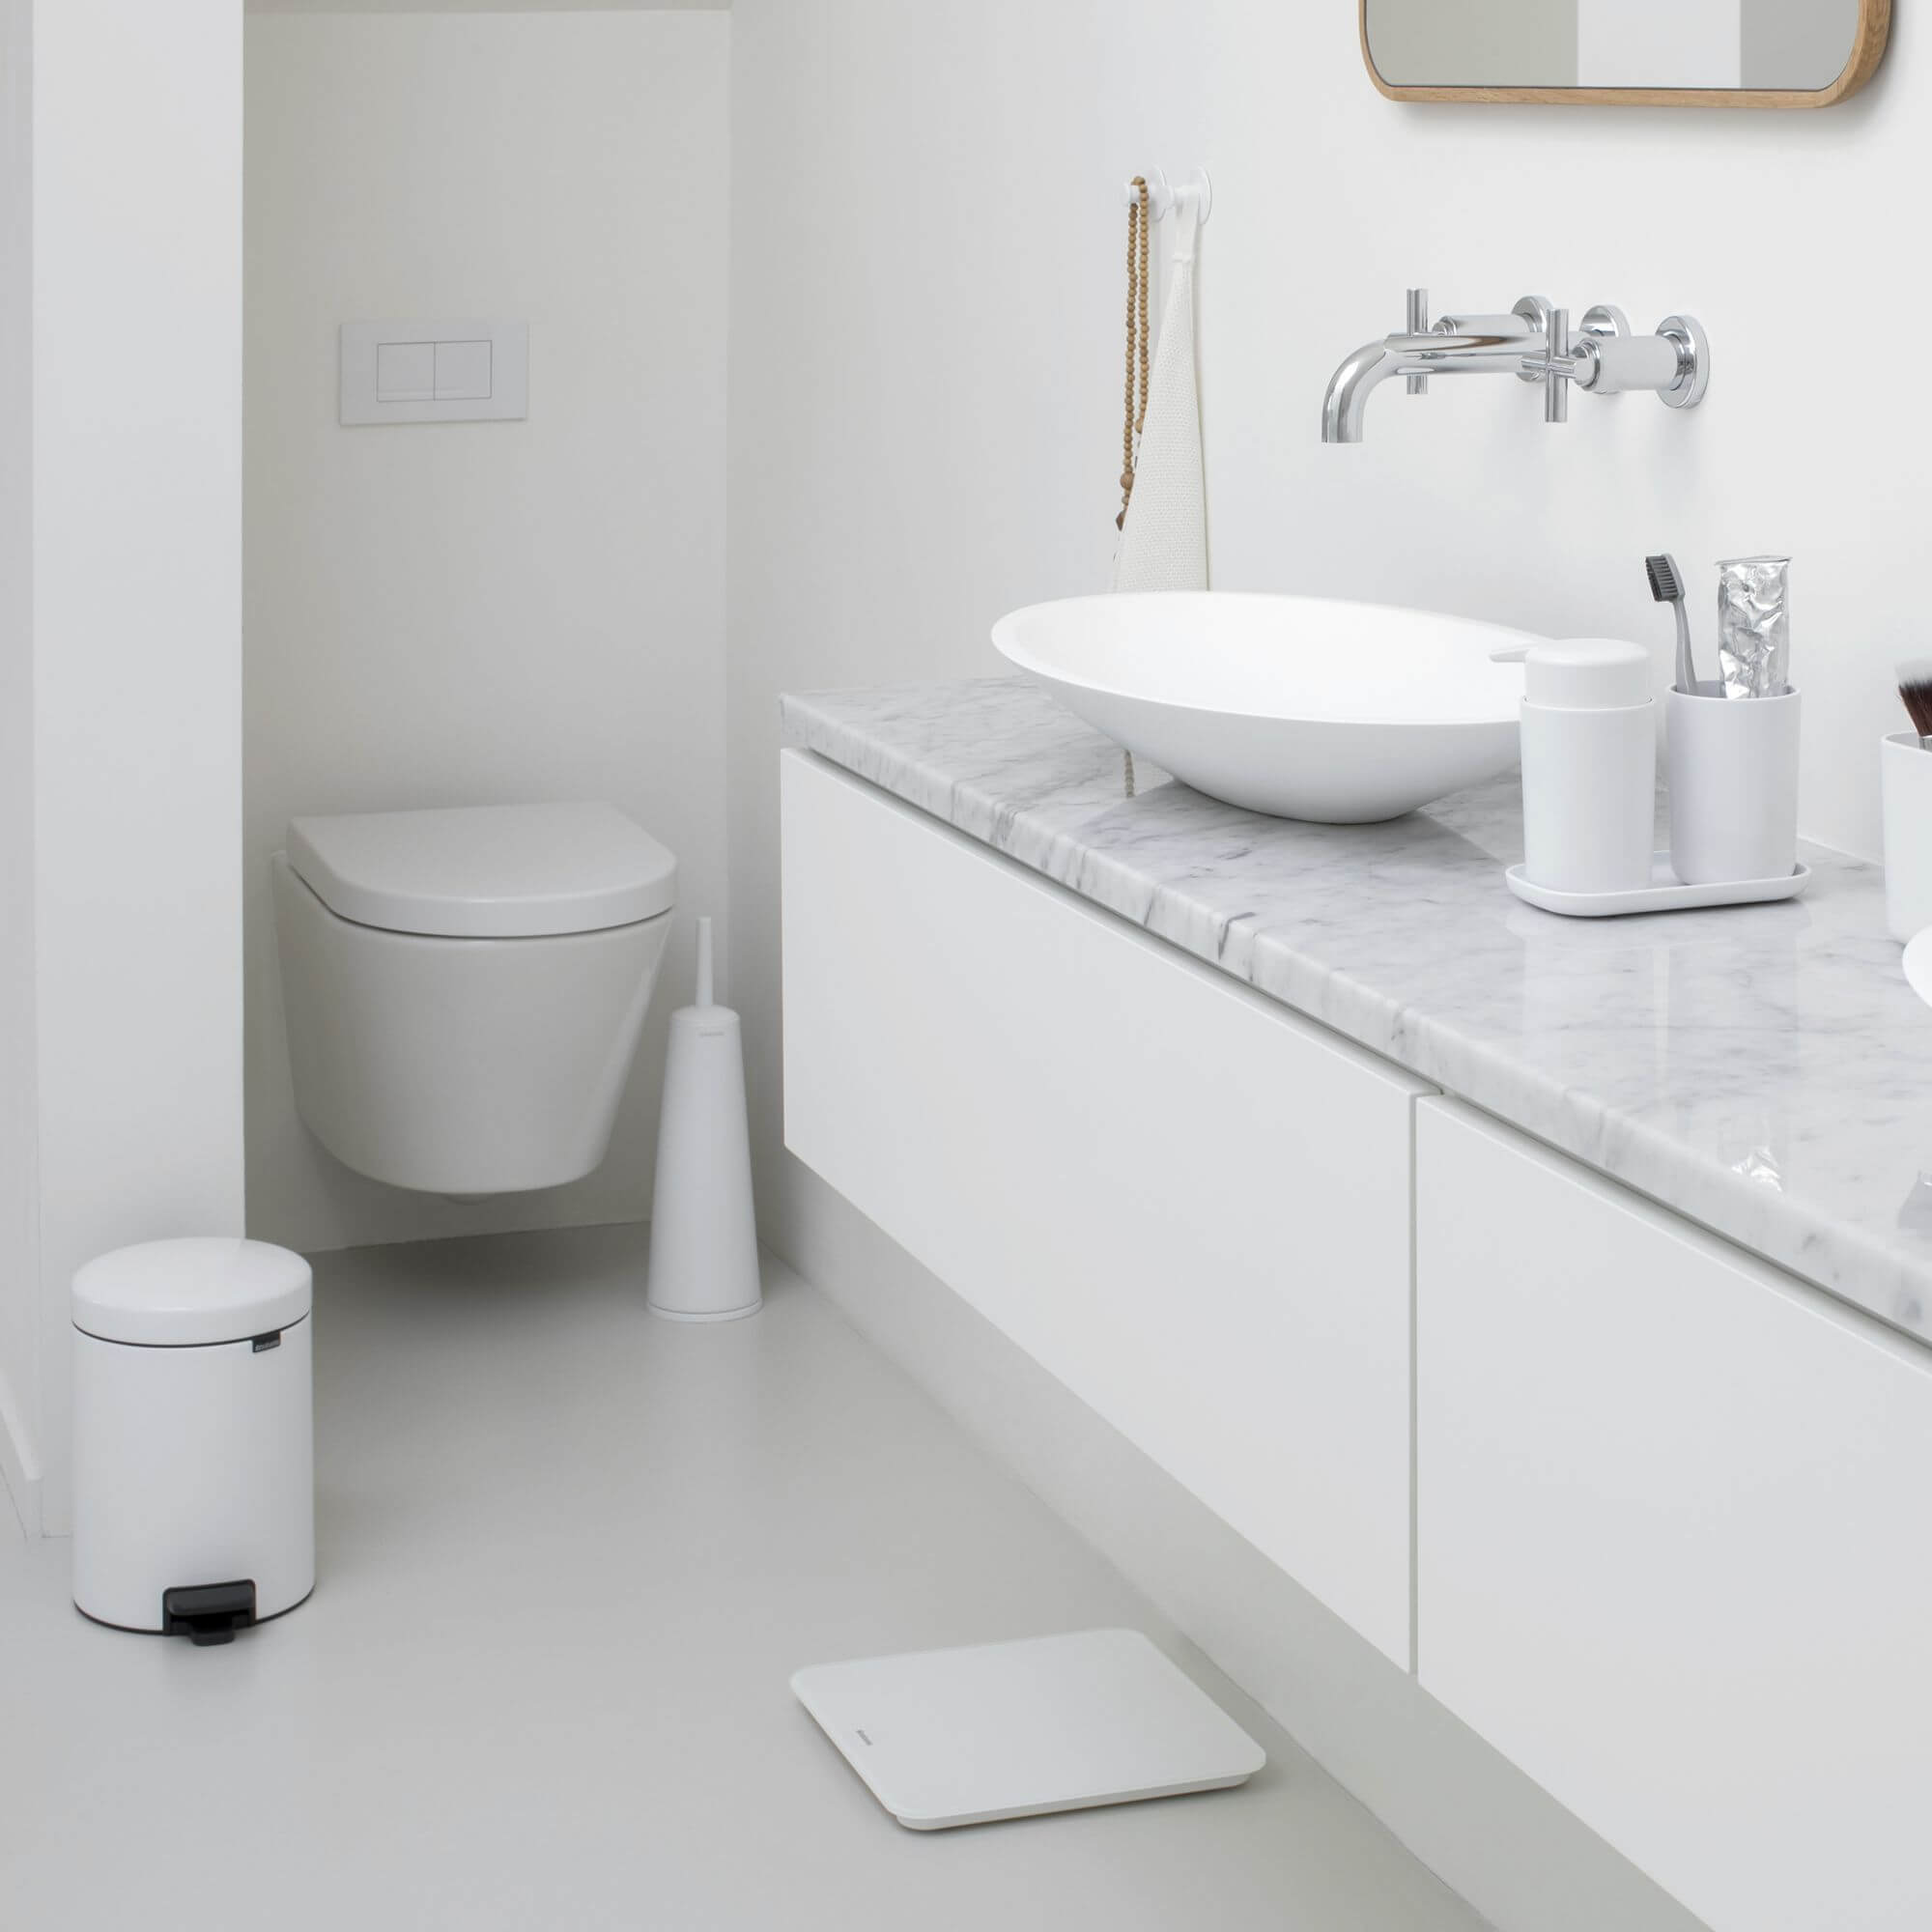 White bathroom accessories and storage solutions in a modern bathroom